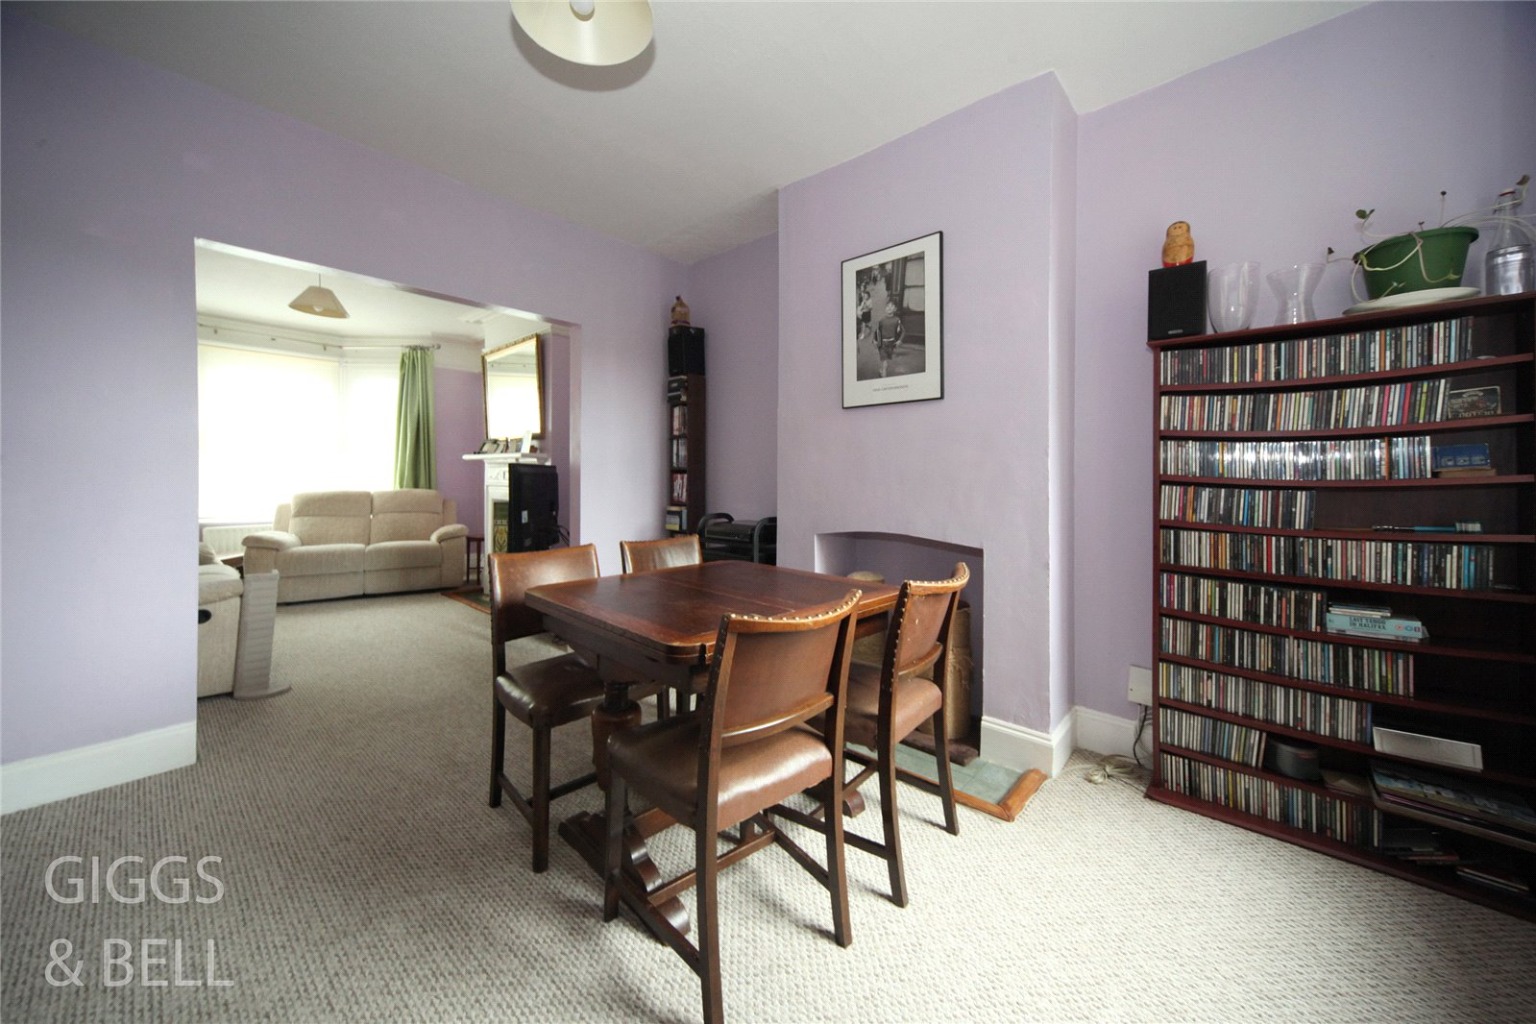 3 bed terraced house for sale in High Town Road, Luton - Property Image 1